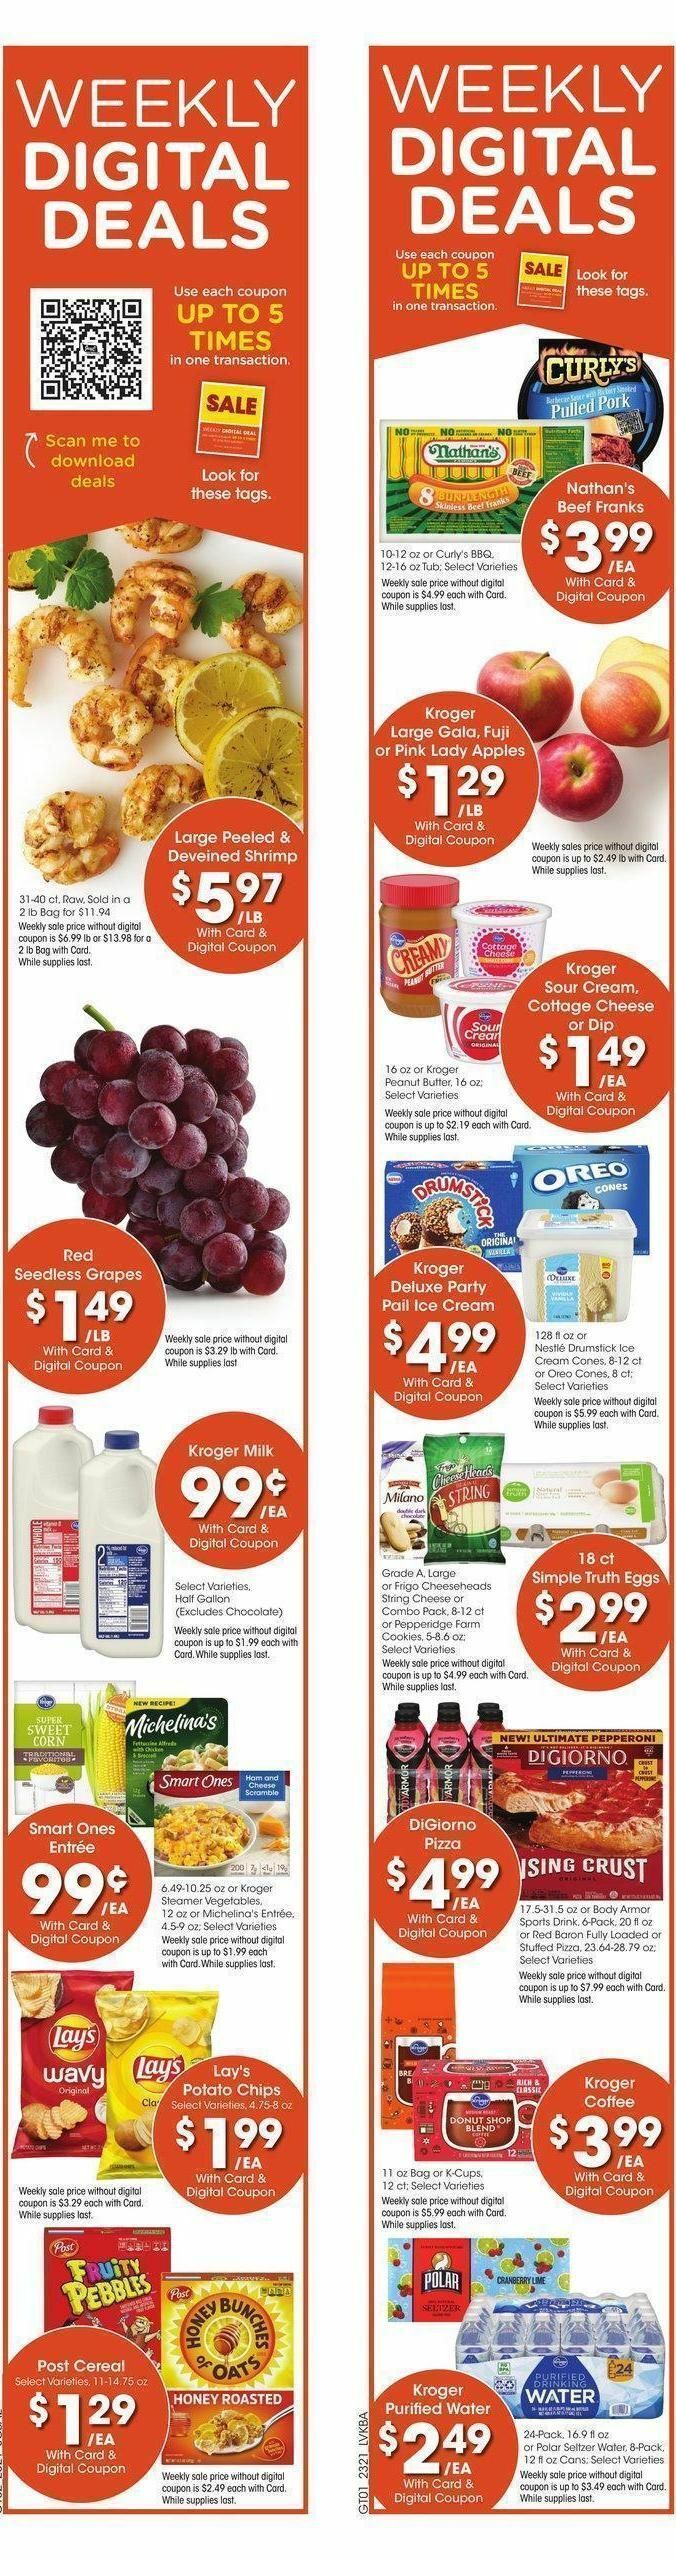 Jay C Food Weekly Ad from June 21